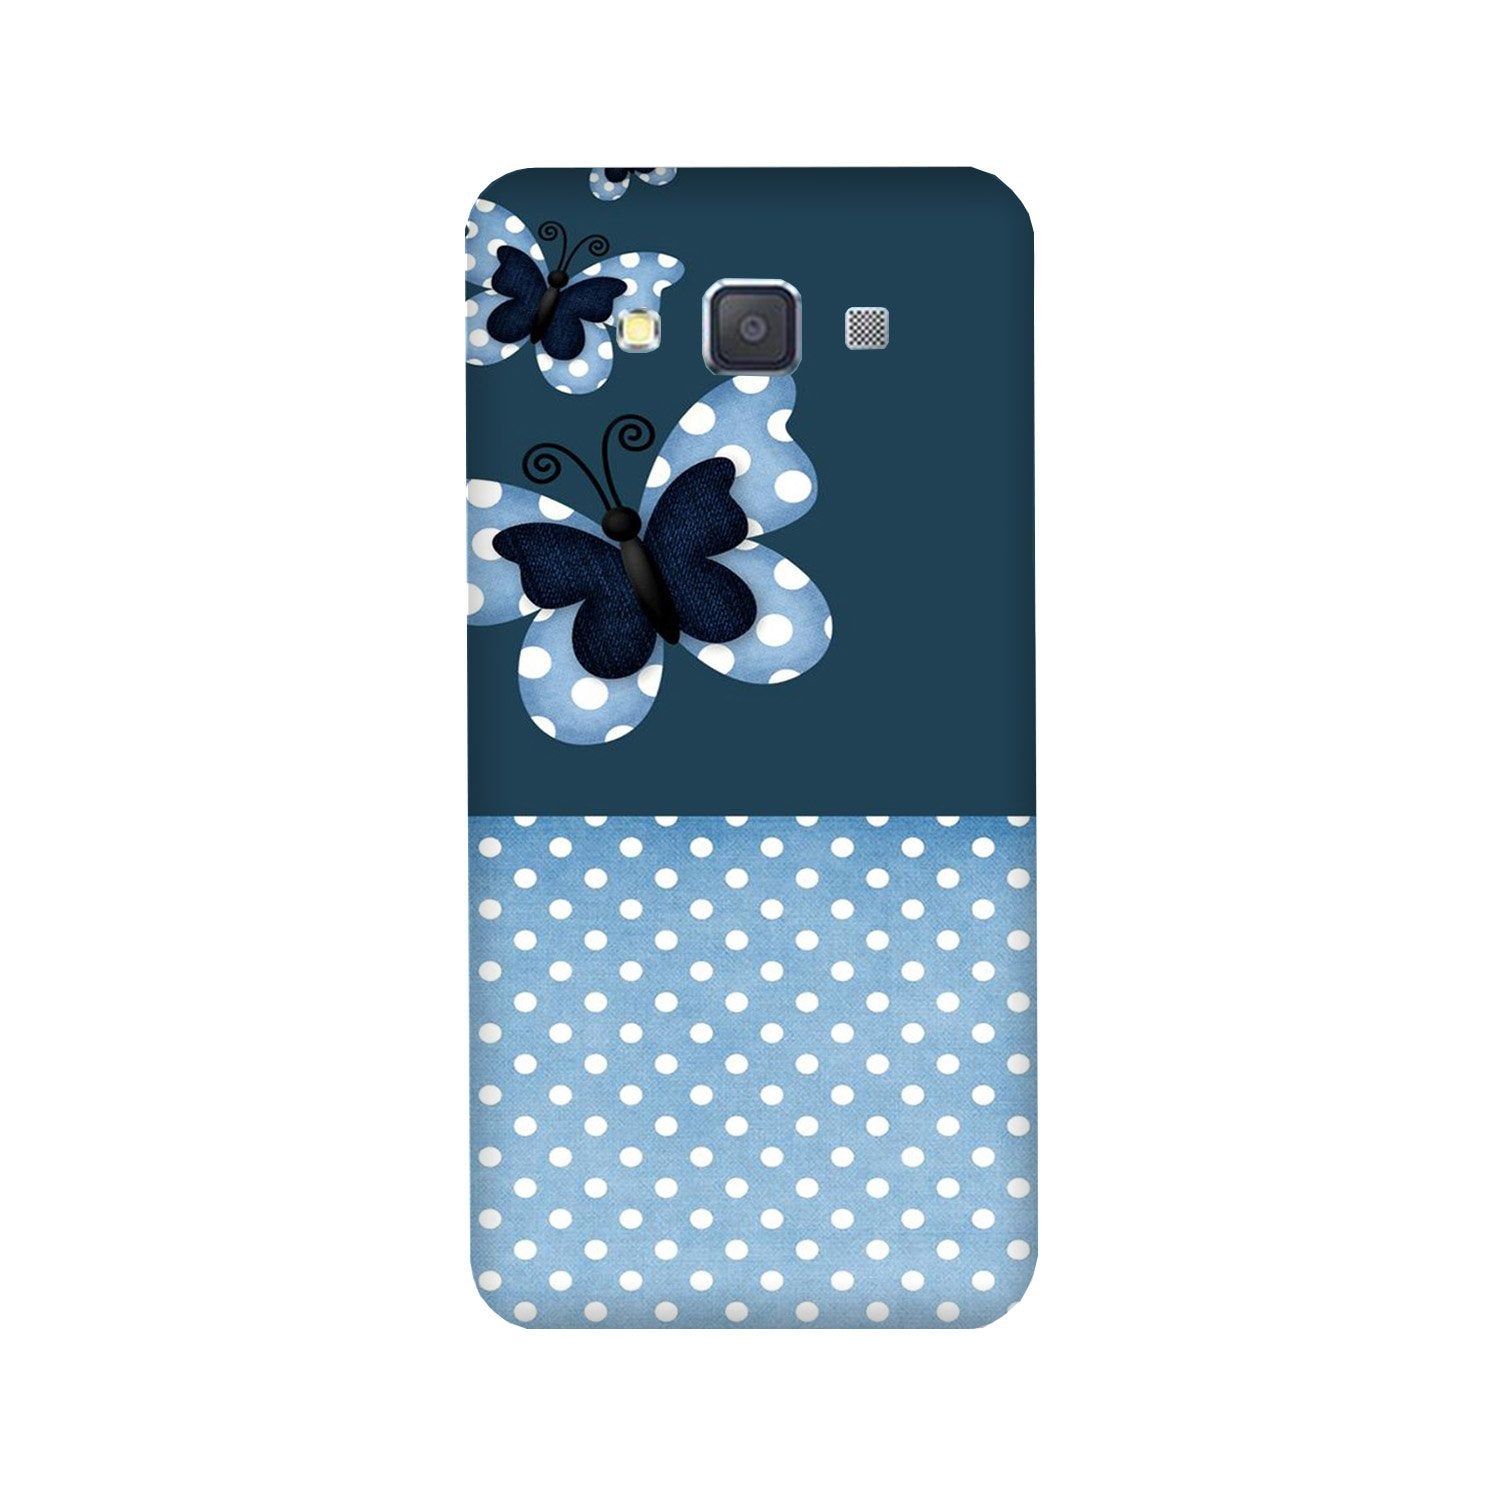 White dots Butterfly Case for Galaxy Grand 2